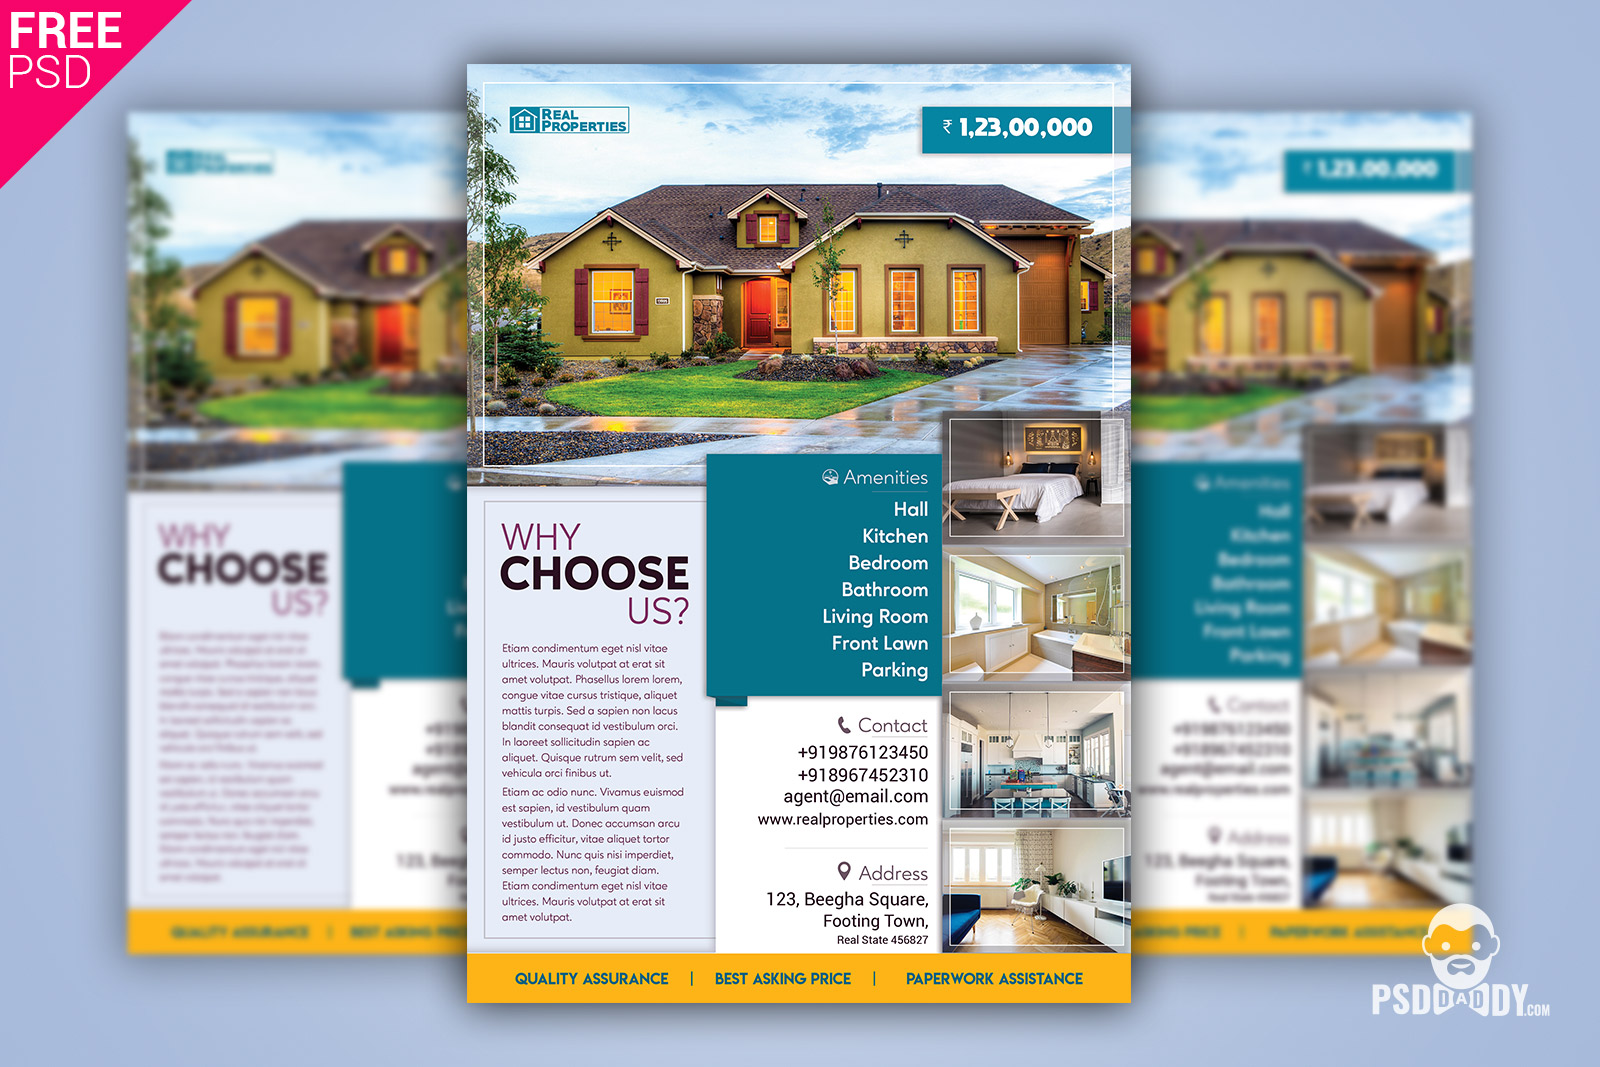 Real Estate Flyer + Social Media Free PSD Template  PsdDaddy.com Throughout Real Estate Brochure Templates Psd Free Download